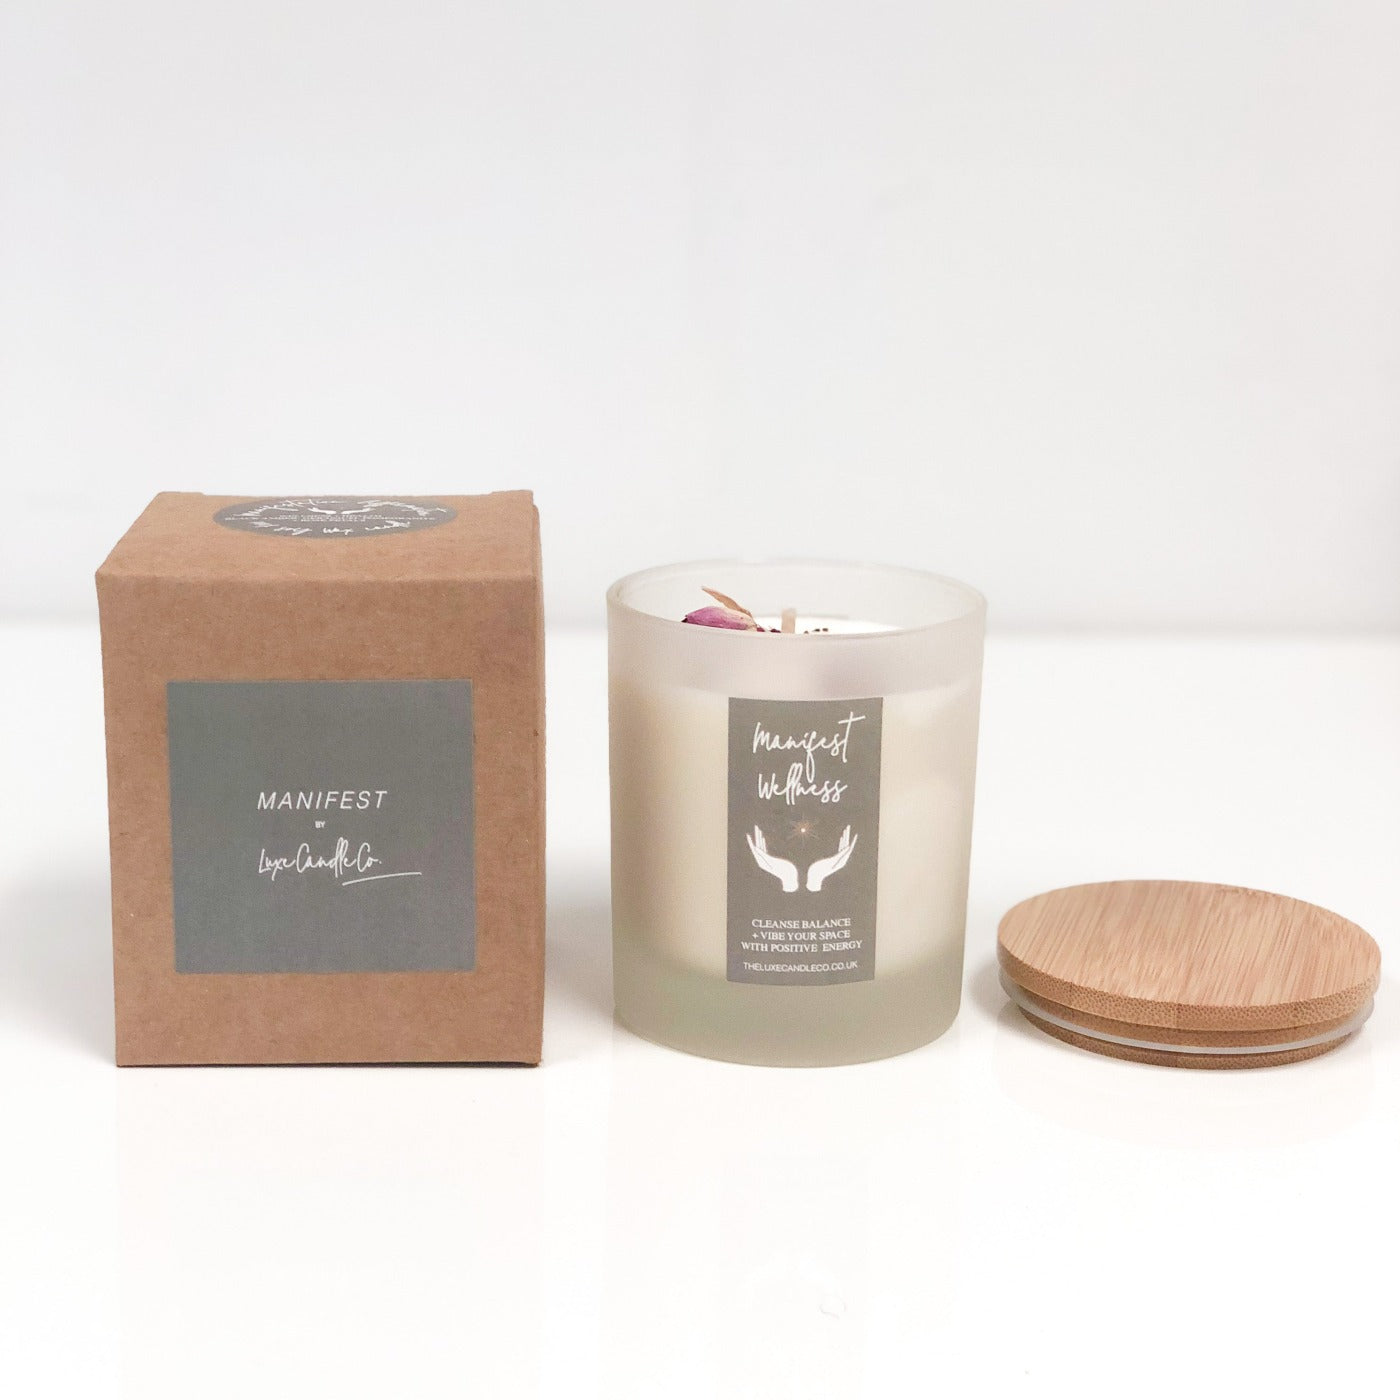 Manifest Health + Wellness Candle . Scented Soy Wax Candle